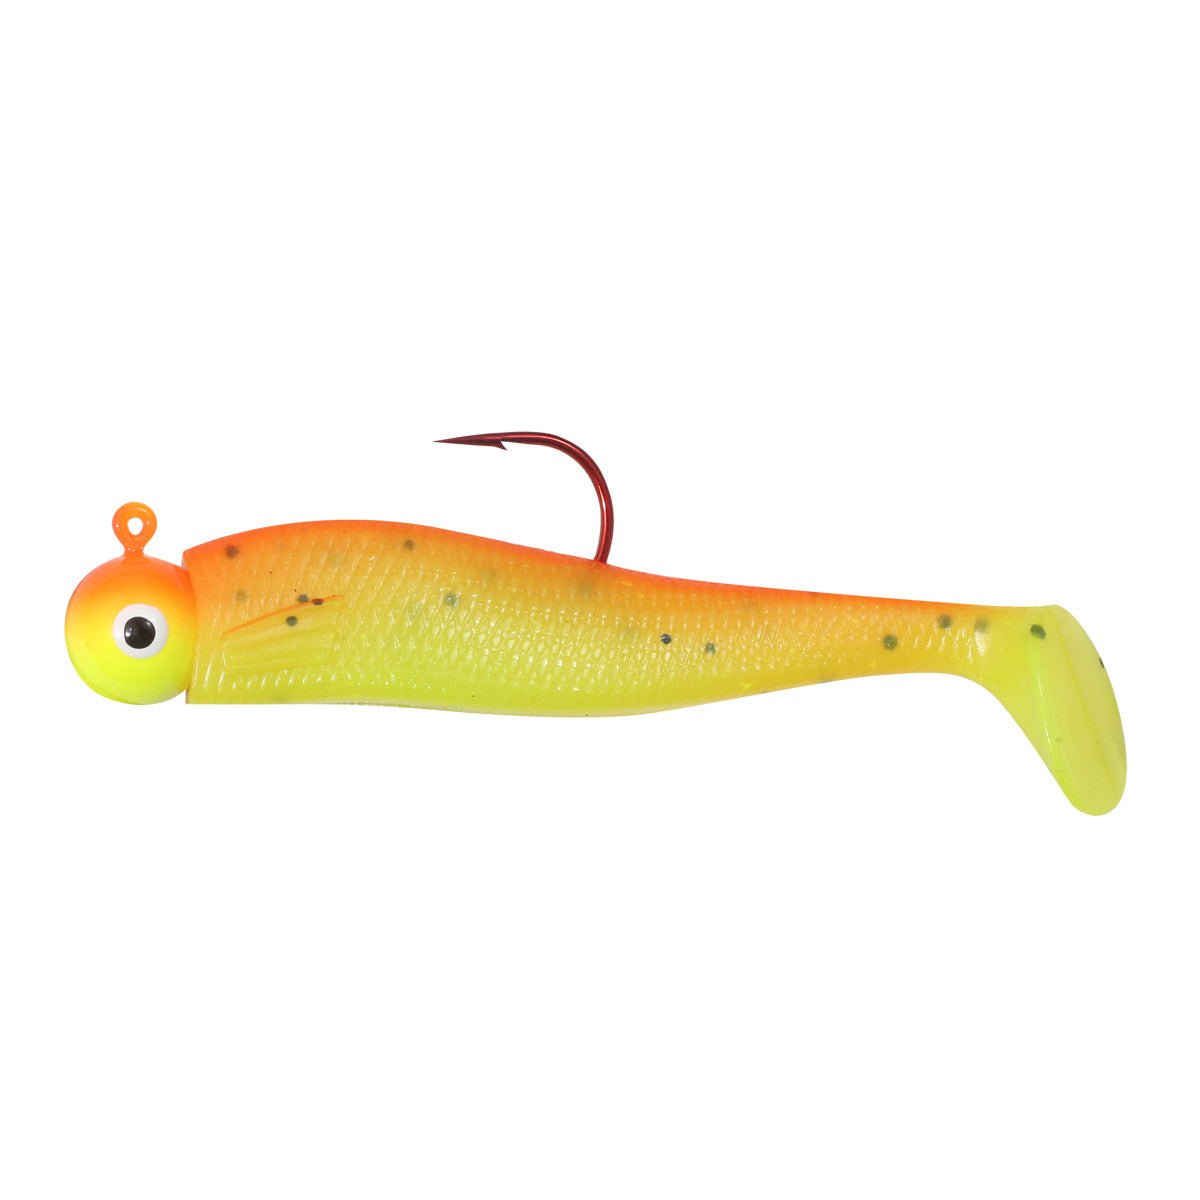 Northland Rigged Gum-Ball Jig Swimbait - Hamilton Bait and Tackle